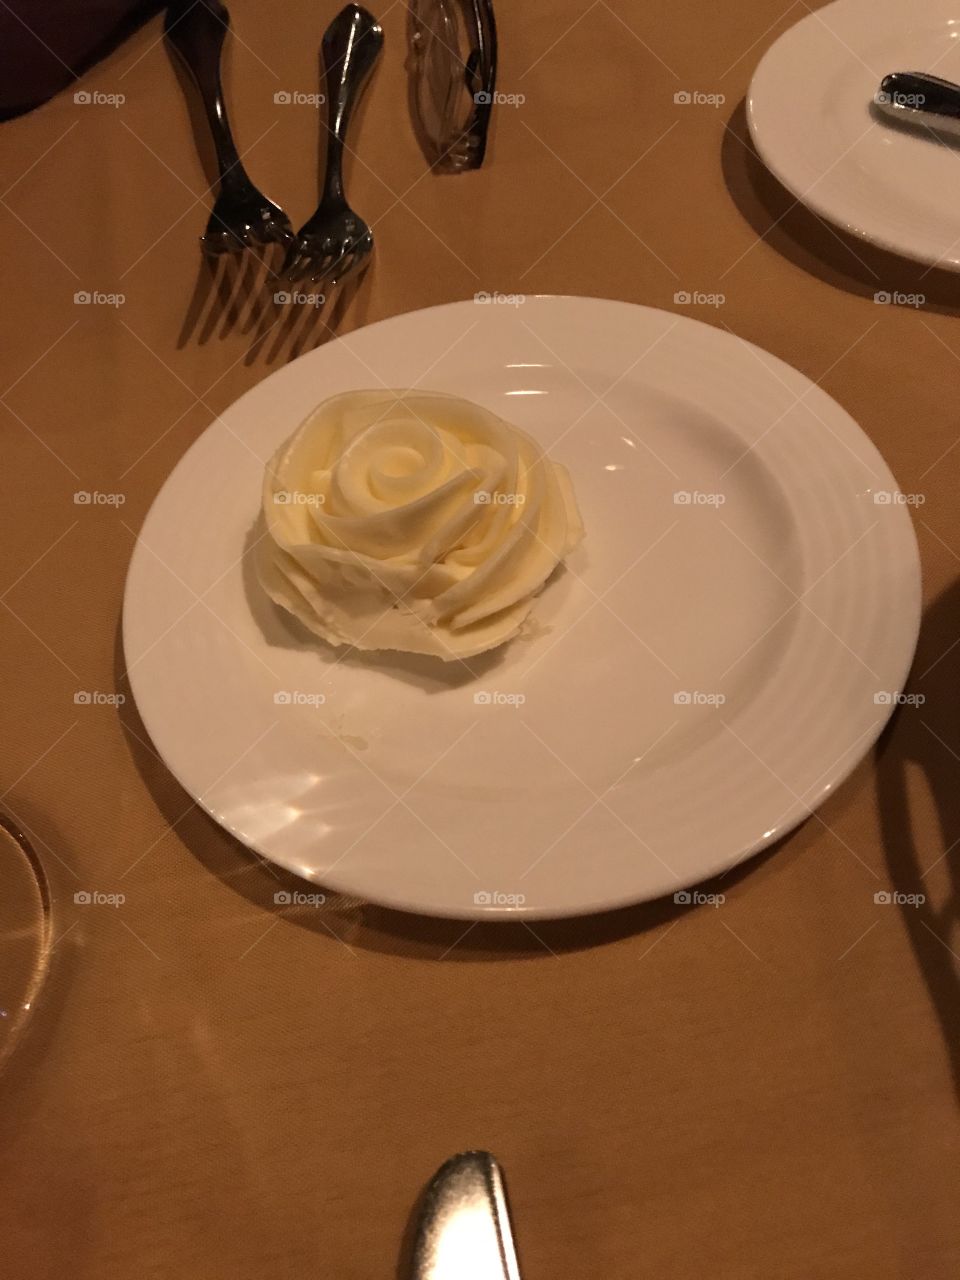 Butter that looks like a Rose